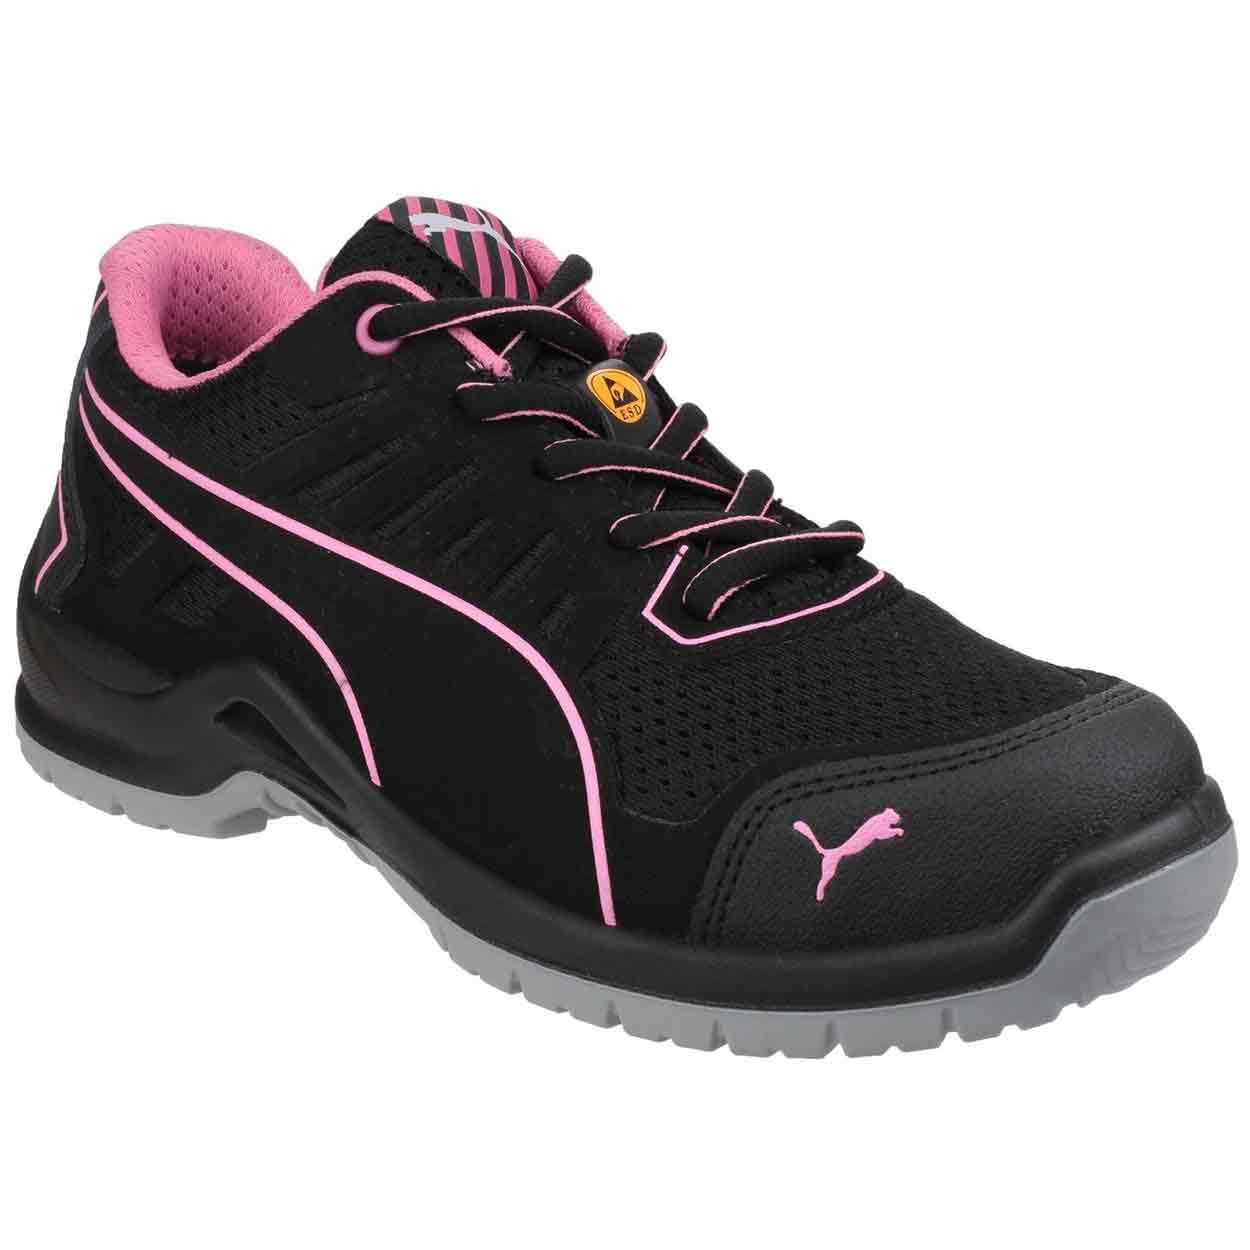 Puma Safety Fuse Tech - Ladies Safety Boots & Shoes - Safety Footwear -  Best Workwear